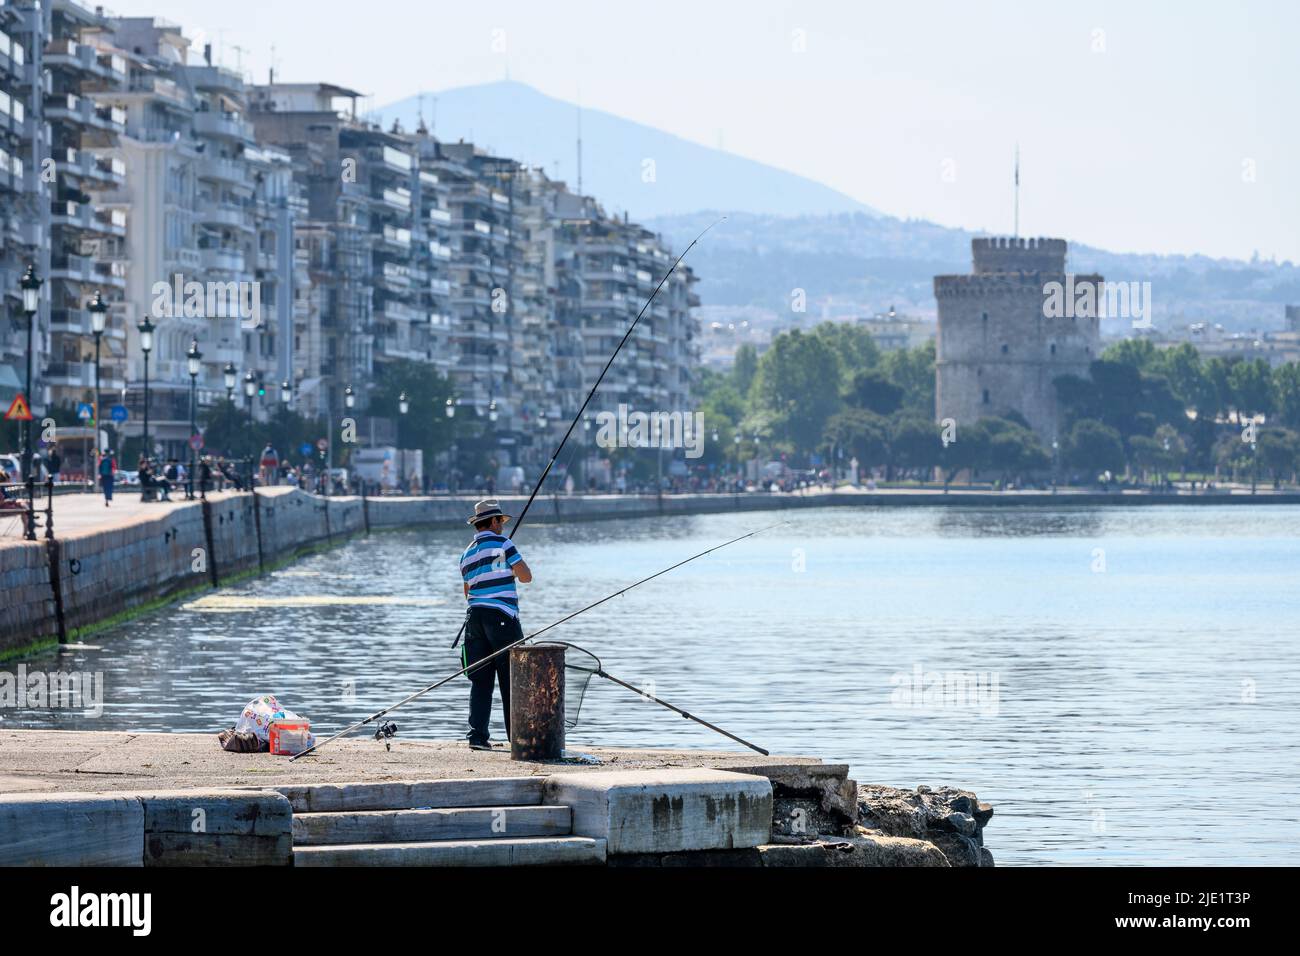 A fisherman on Thessaloniki waterfront with Nikis Avenue and the white Tower in the background, Macedonia, Northern Greece Stock Photo